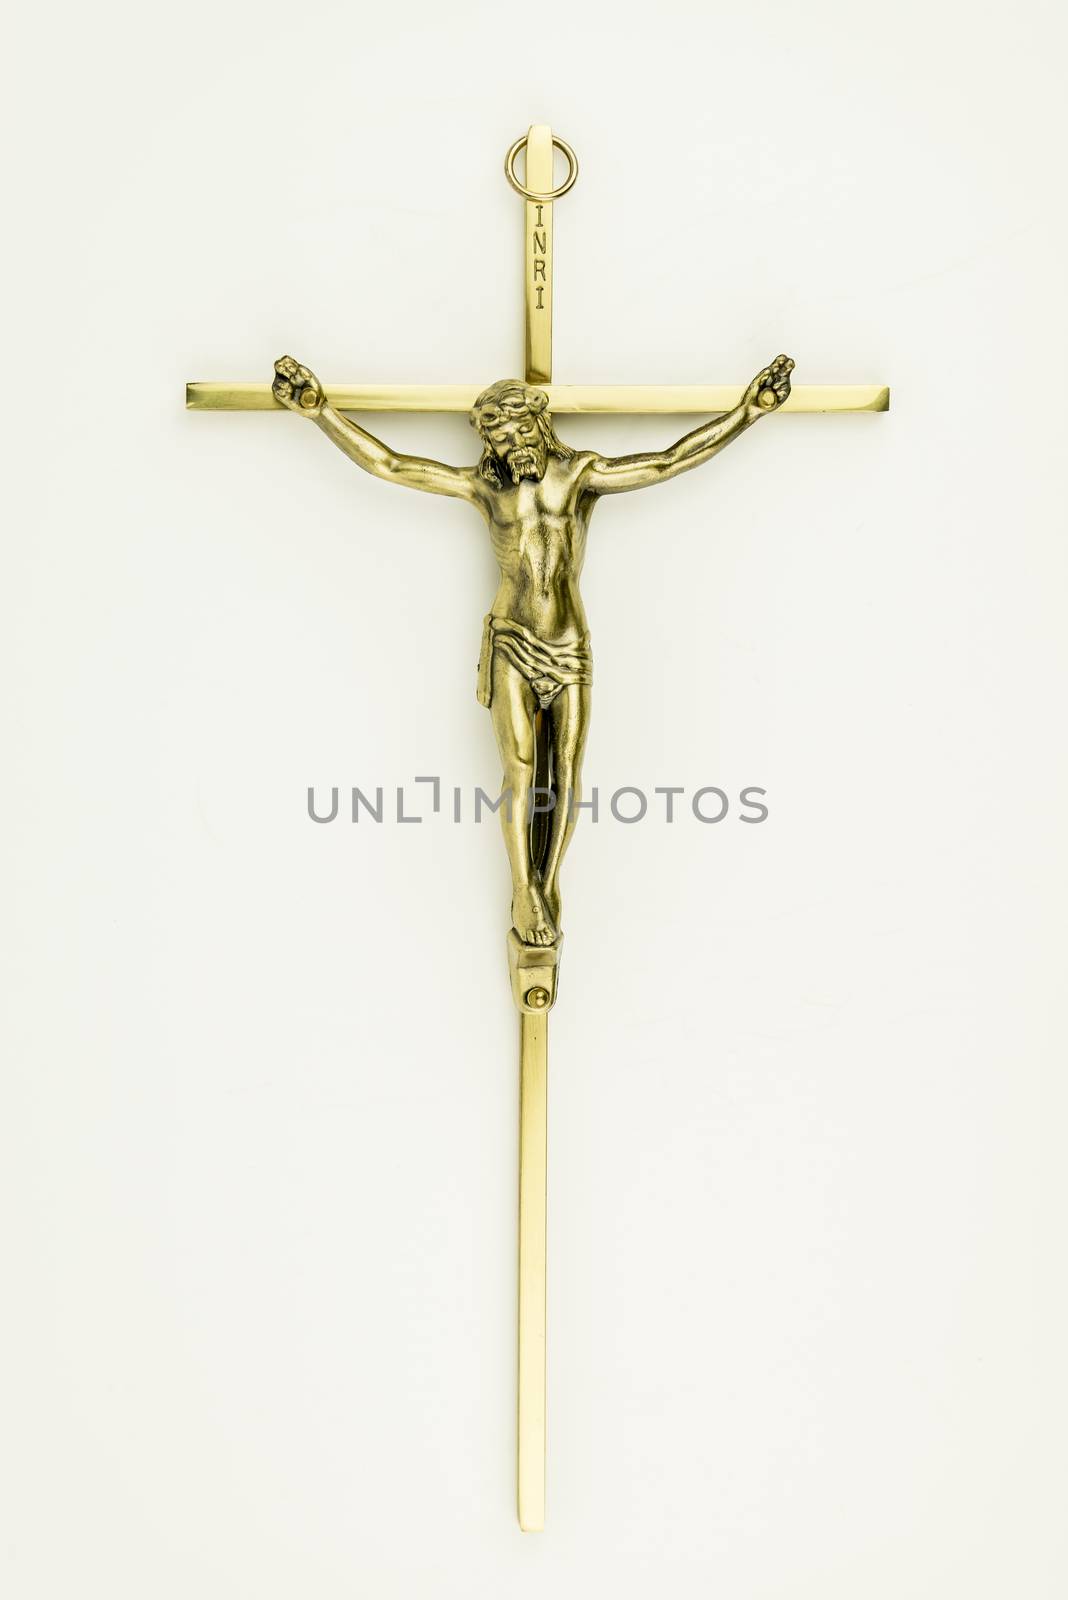 Jesus on the cross isolated on white